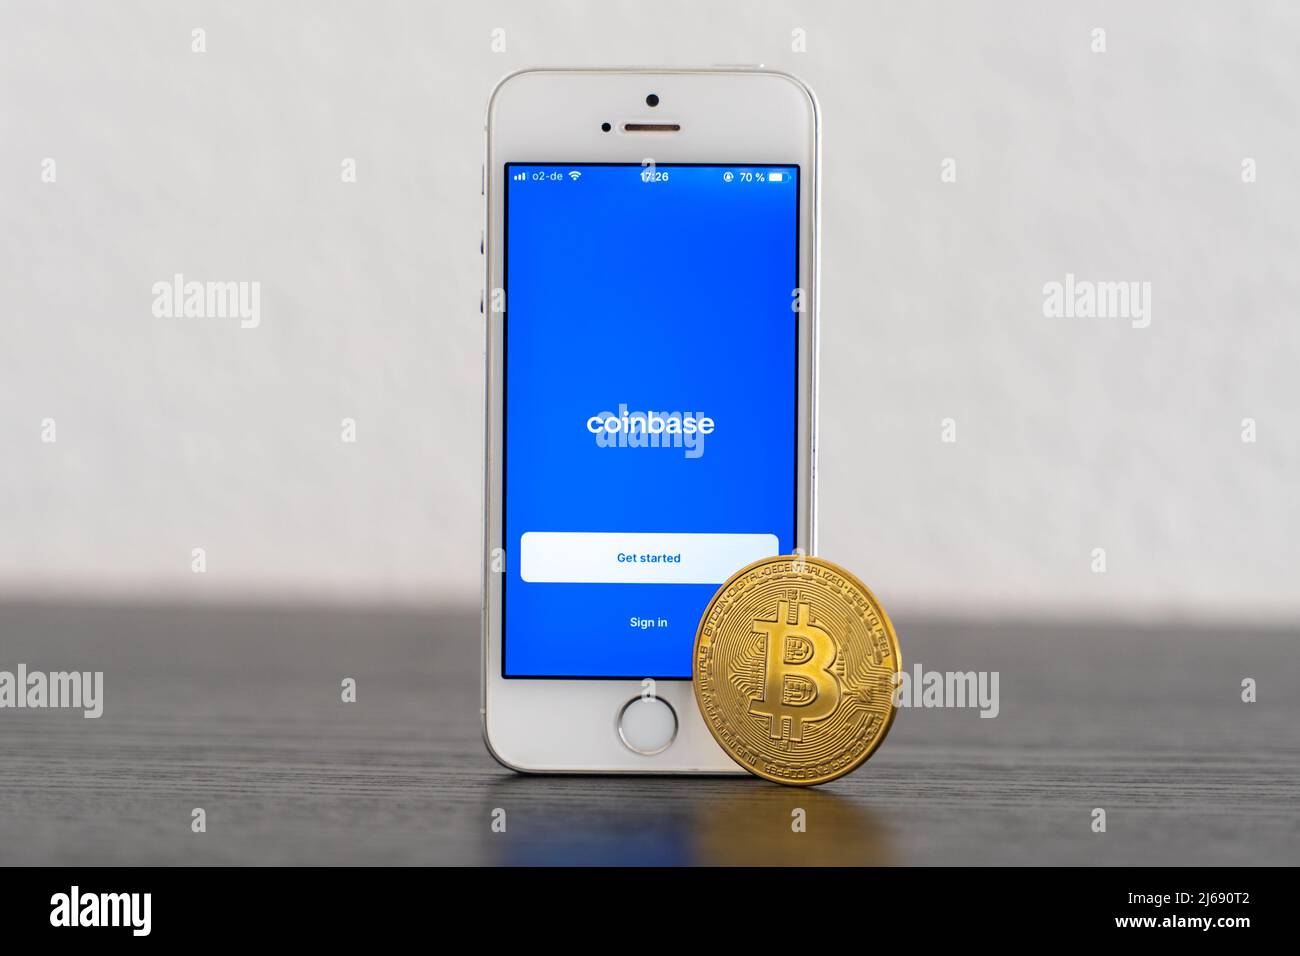 Coinbase app on a smartphone at the day of the IPO on the stock exchange. Marketplace to trade a crypto currency like Bitcoin and Ethereum. Stock Photo